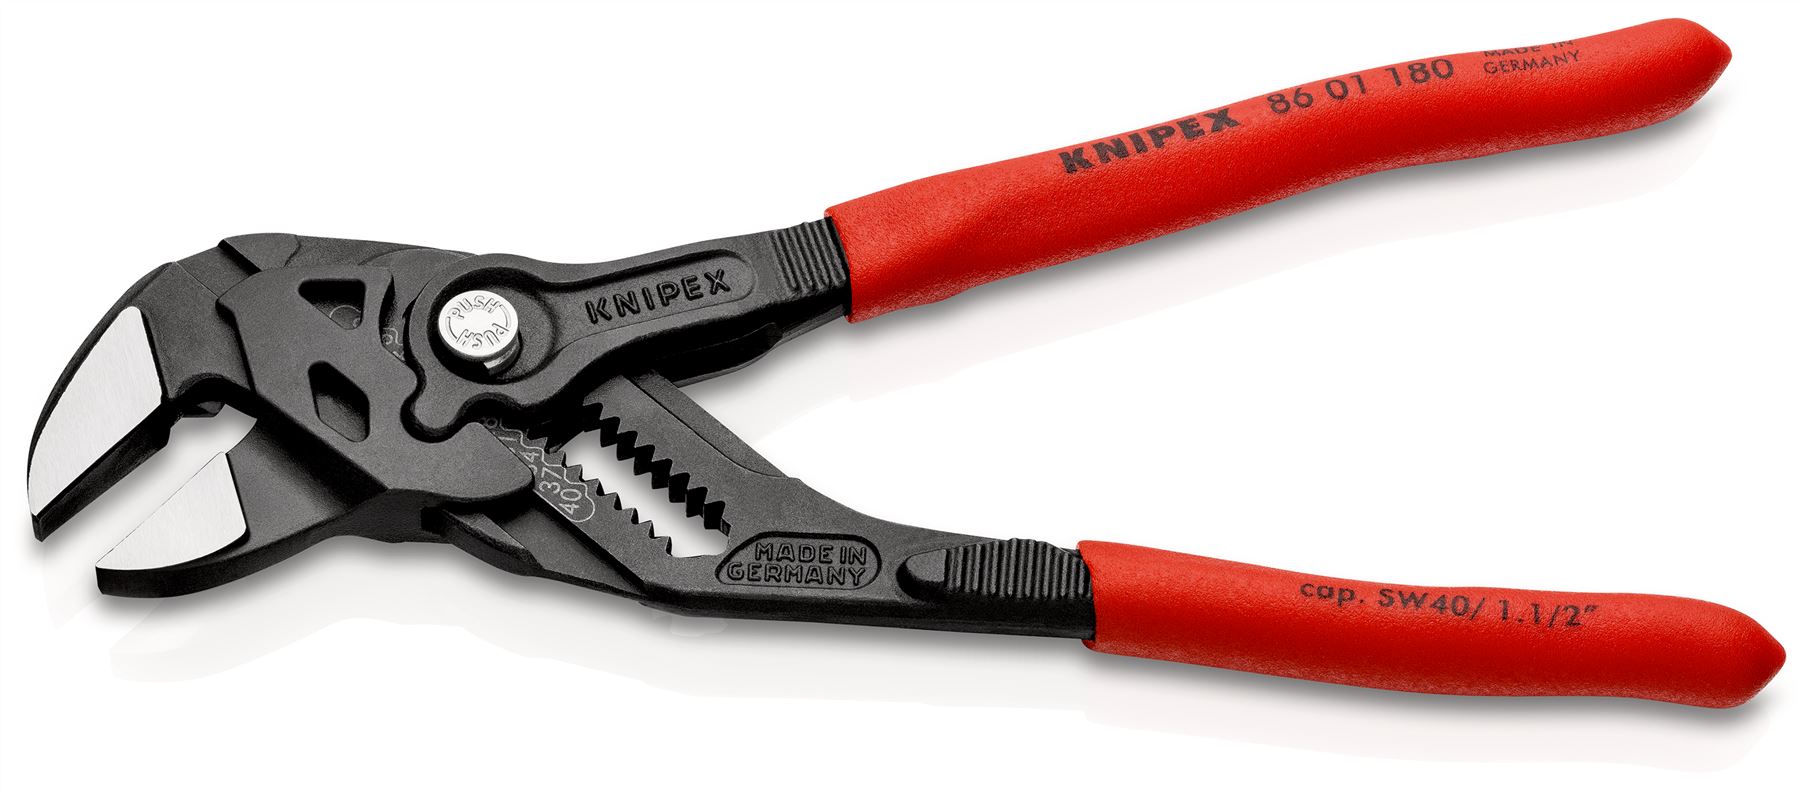 KNIPEX Pliers Wrench Slip Joint Plier 180mm Plastic Coated Handles Non Slip 86 01 180 SB